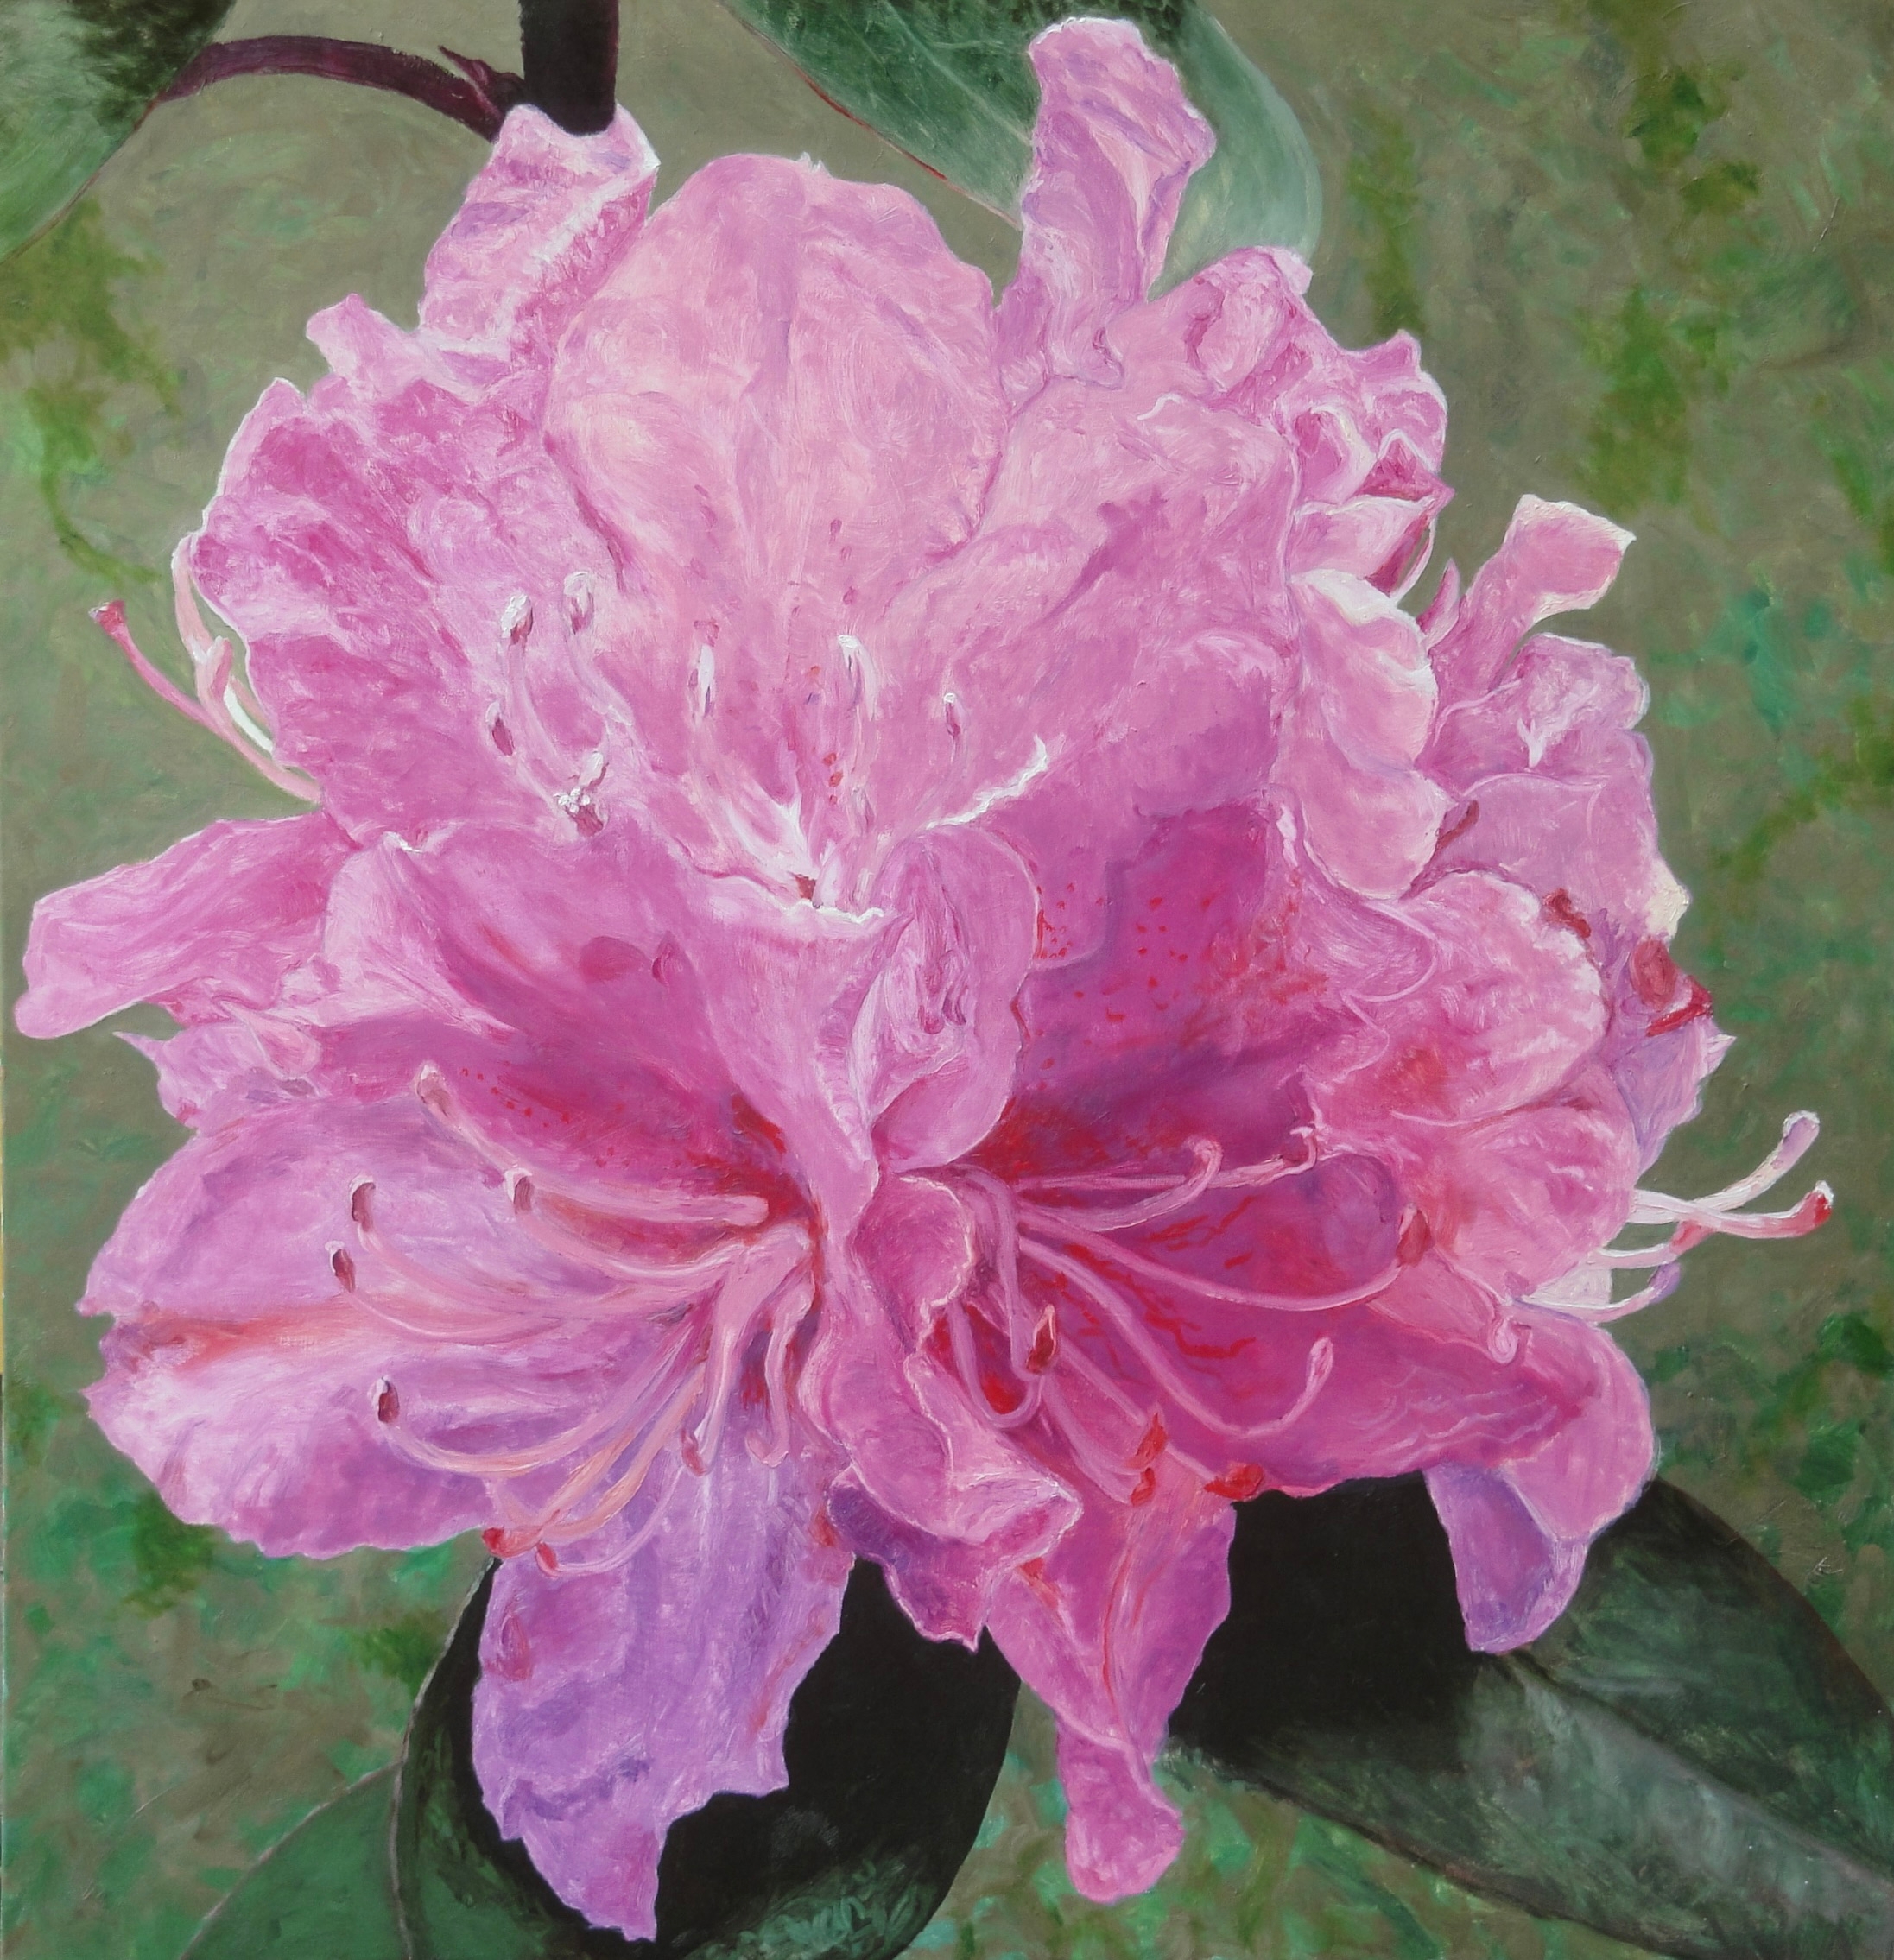 Donald Shambroom's painting from the Collection called Blossom depicting a Azalea